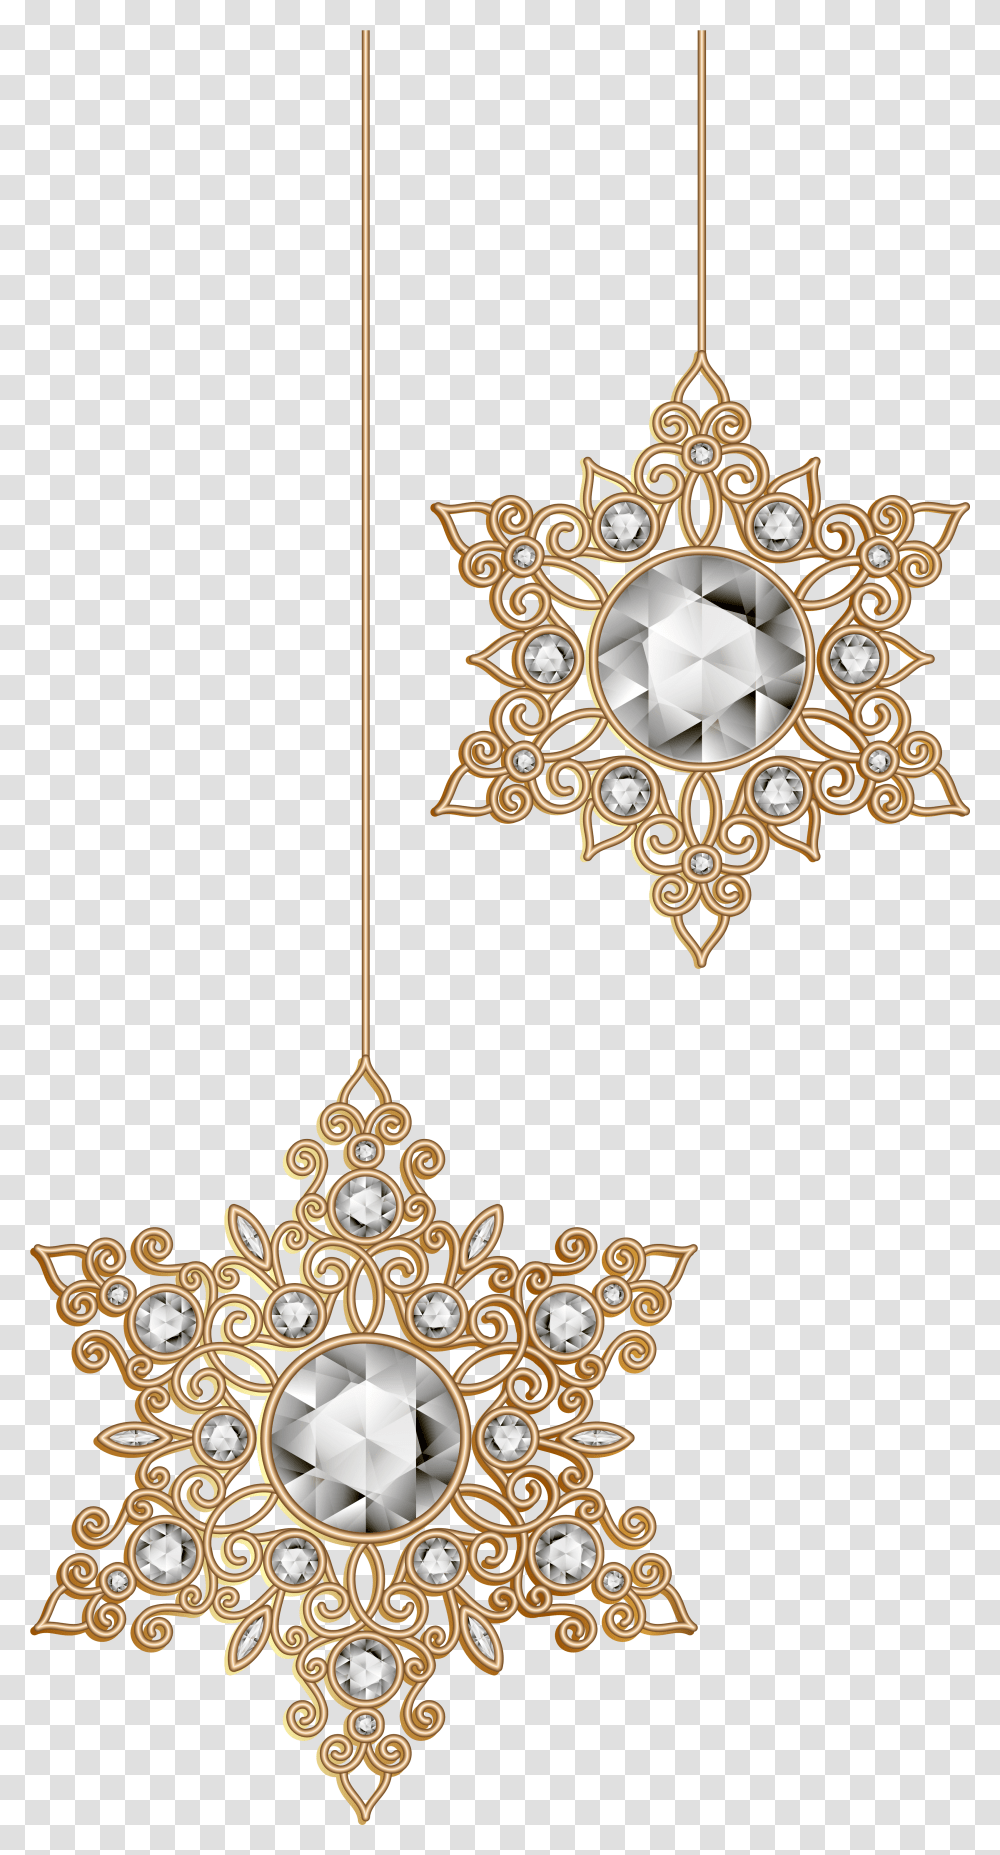 Ornament Snowflake Clipart Black And White Stock Snowflake Ornament, Accessories, Accessory, Jewelry, Brooch Transparent Png